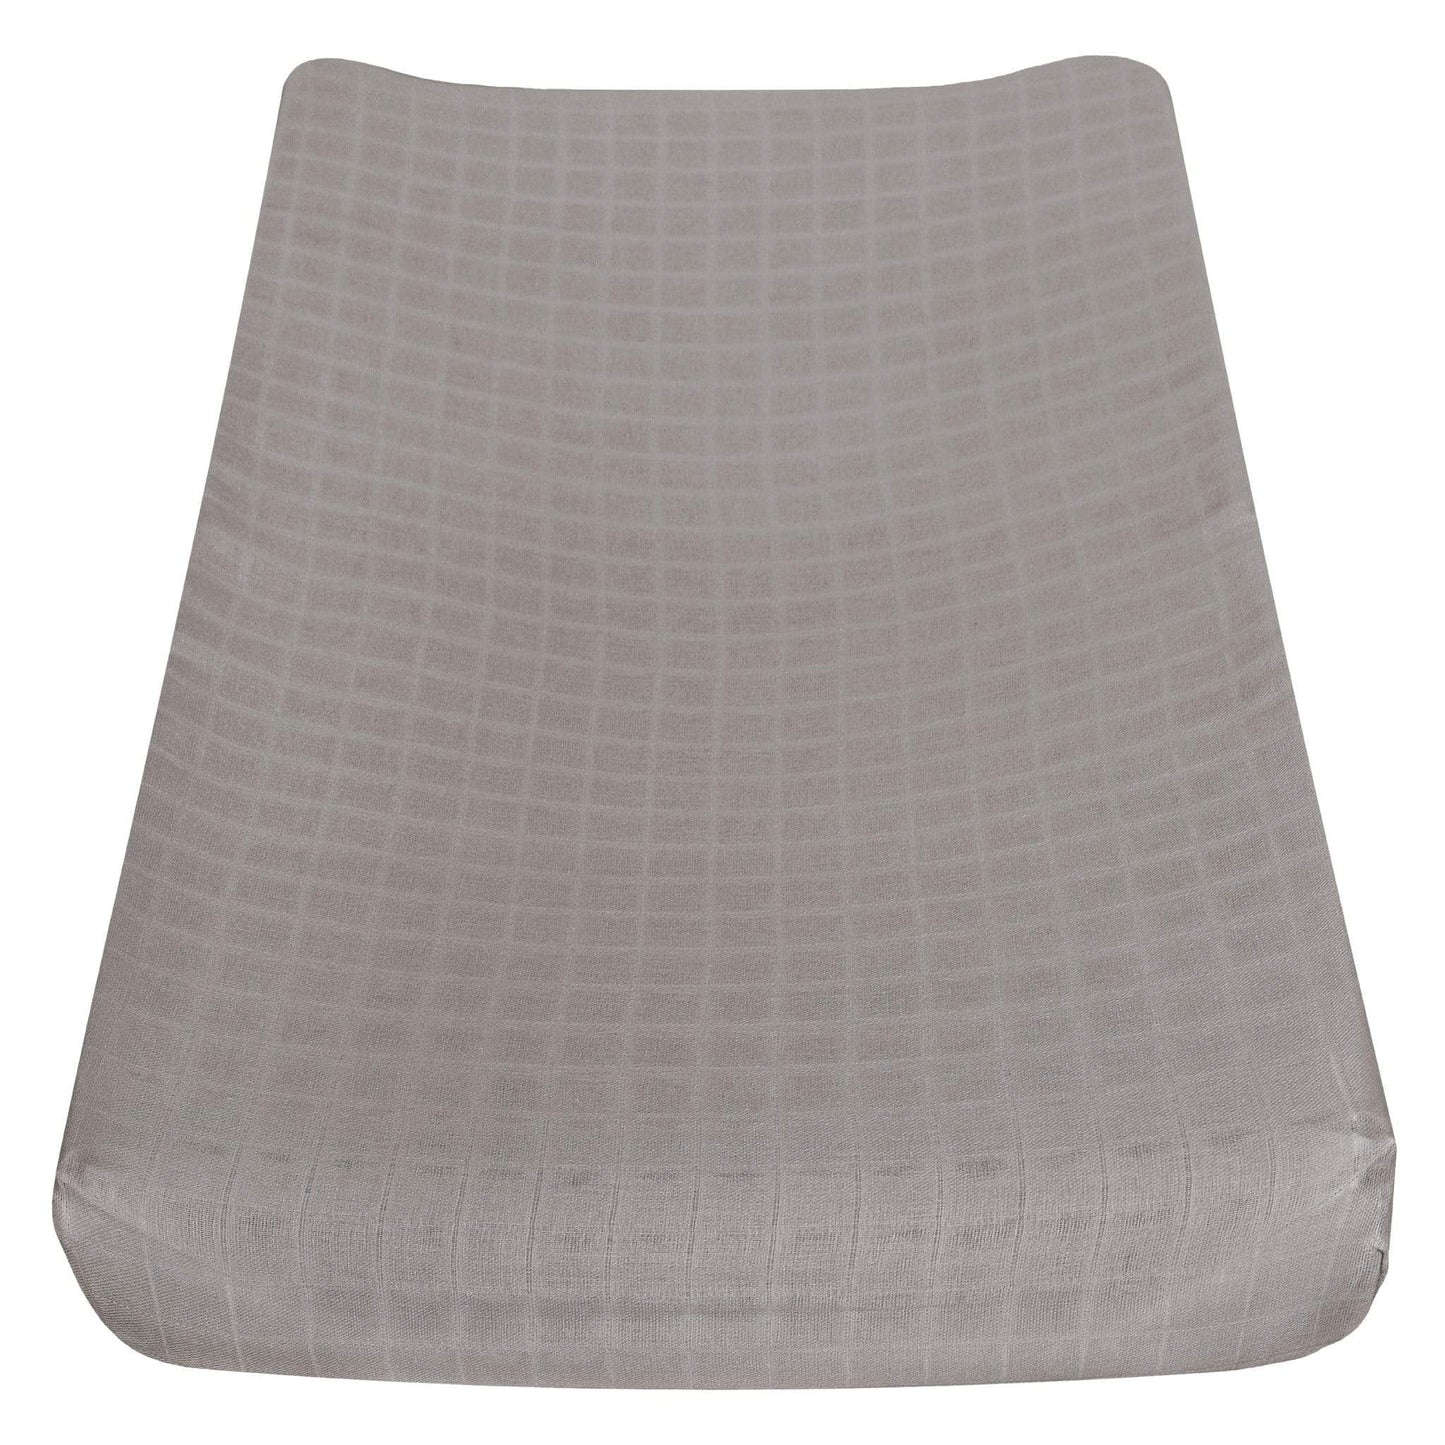 Shop Changing Pads & Changing Pad Covers at